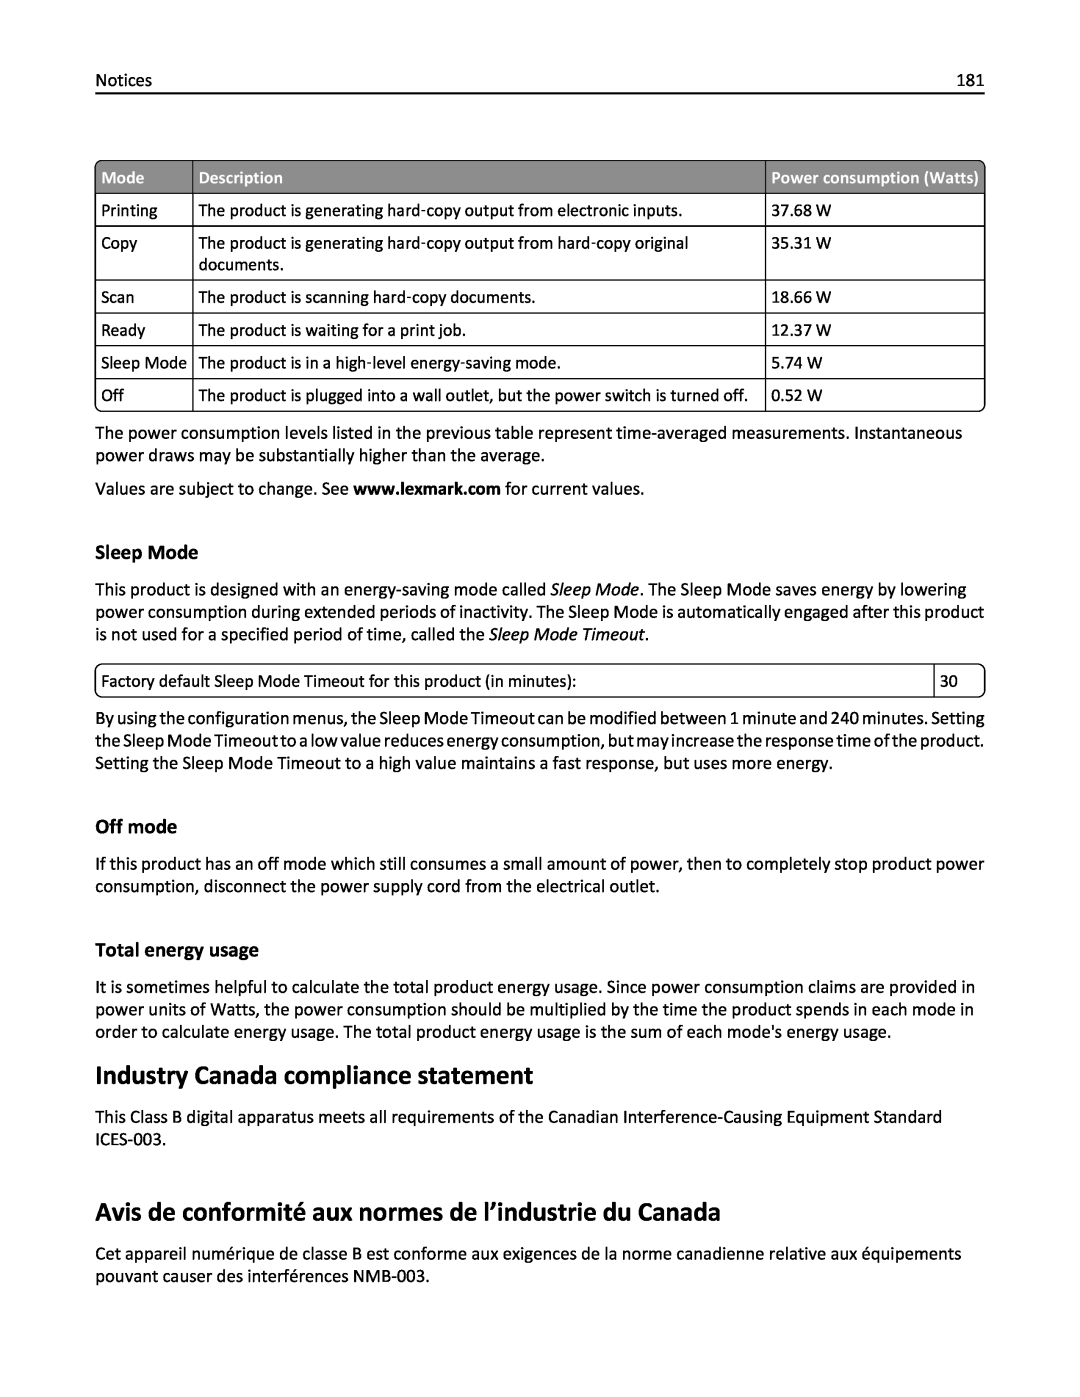 Lexmark 200, 20E manual Industry Canada compliance statement, Sleep Mode, Off mode, Total energy usage 